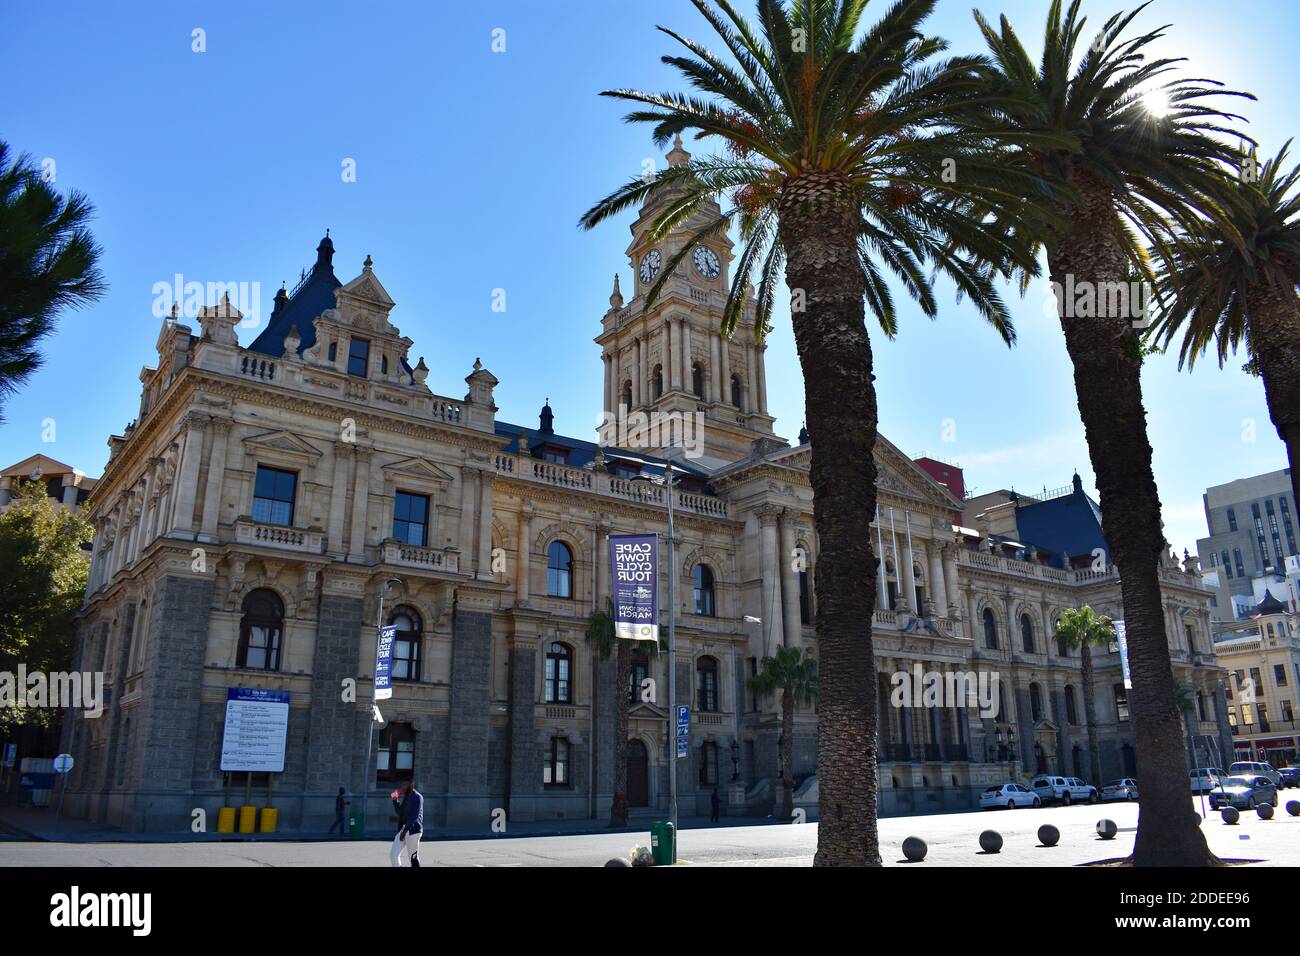 A view of Cape Town City Hall taken from the Grand Parade.  Palm trees line the edge of the public square.  Cape Town, South Africa. Stock Photo